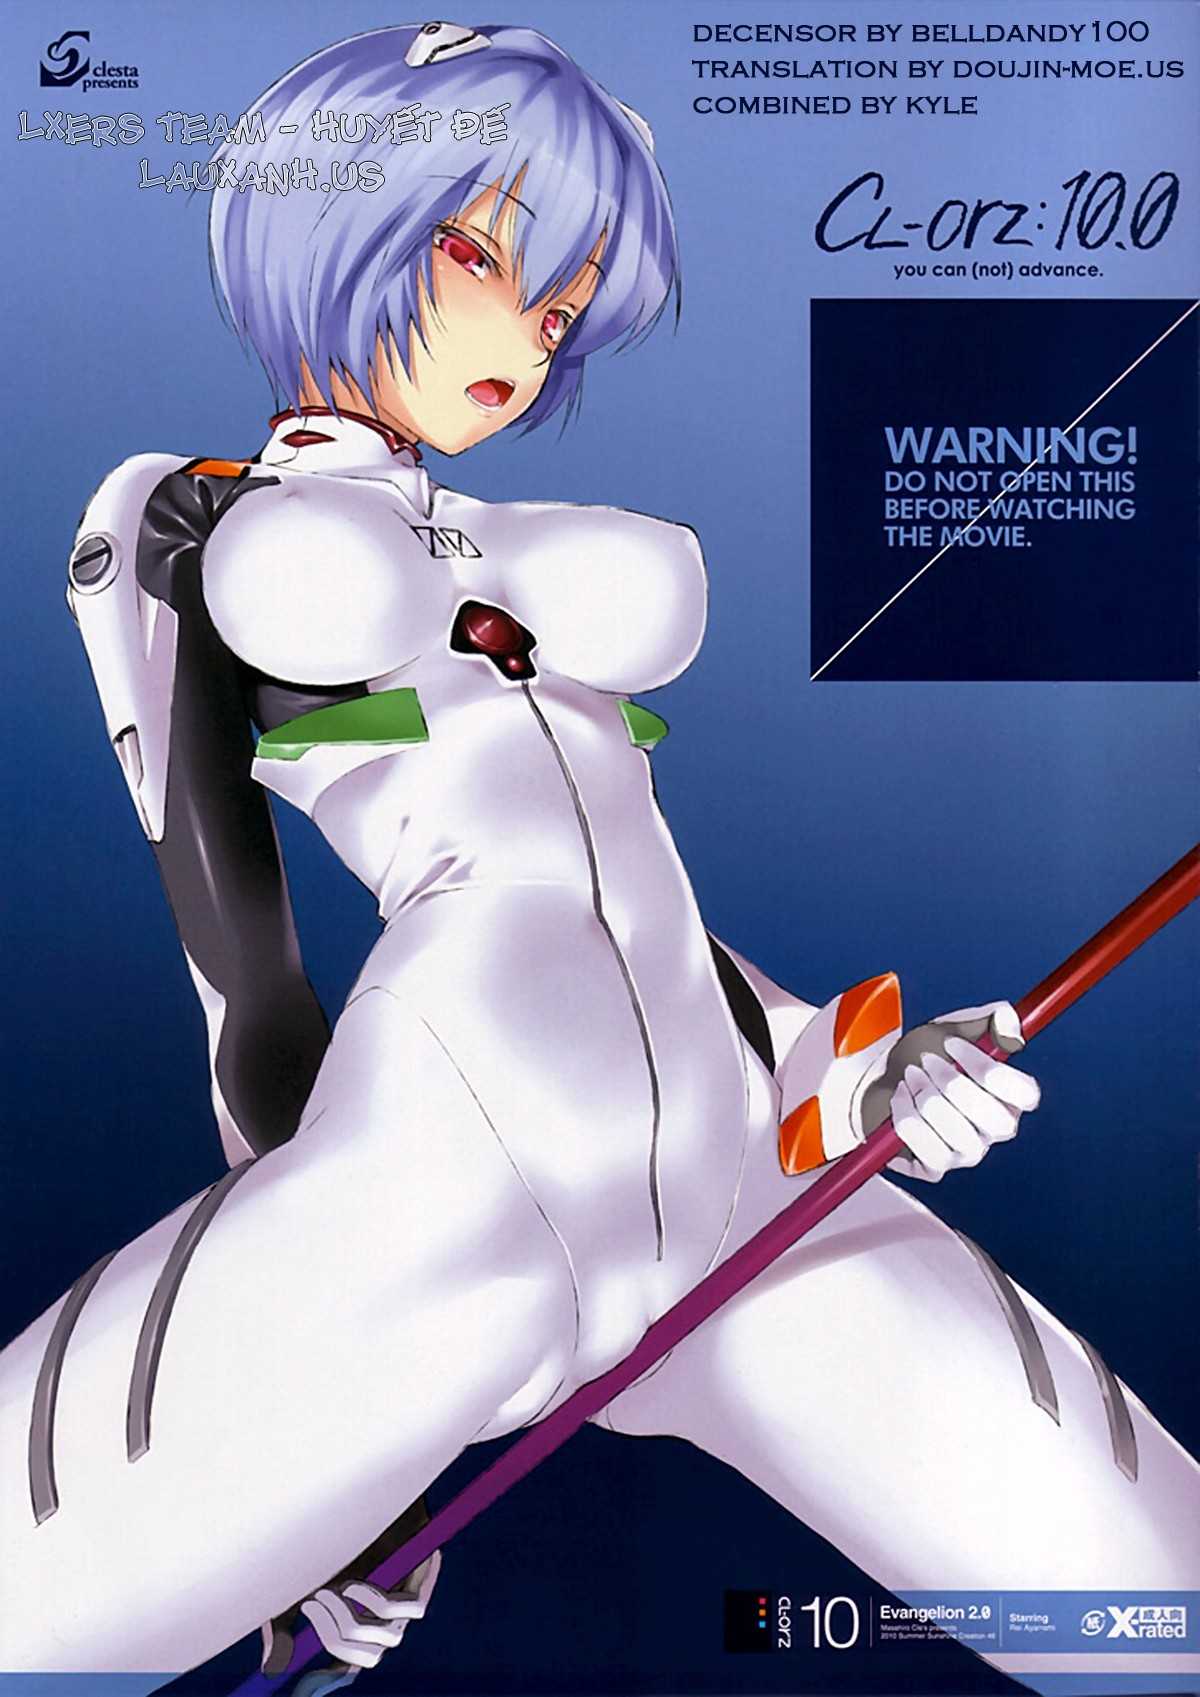 (SC48) [Clesta (Kure Masahiro)] CL-orz:10.0 you can (not) advance (Neon Genesis Evangelion) [Vietnamese] (サンクリ48) [クレスタ (呉マサヒロ)] CL-orz 10.0 you can (not) advance (エヴァンゲリオン)